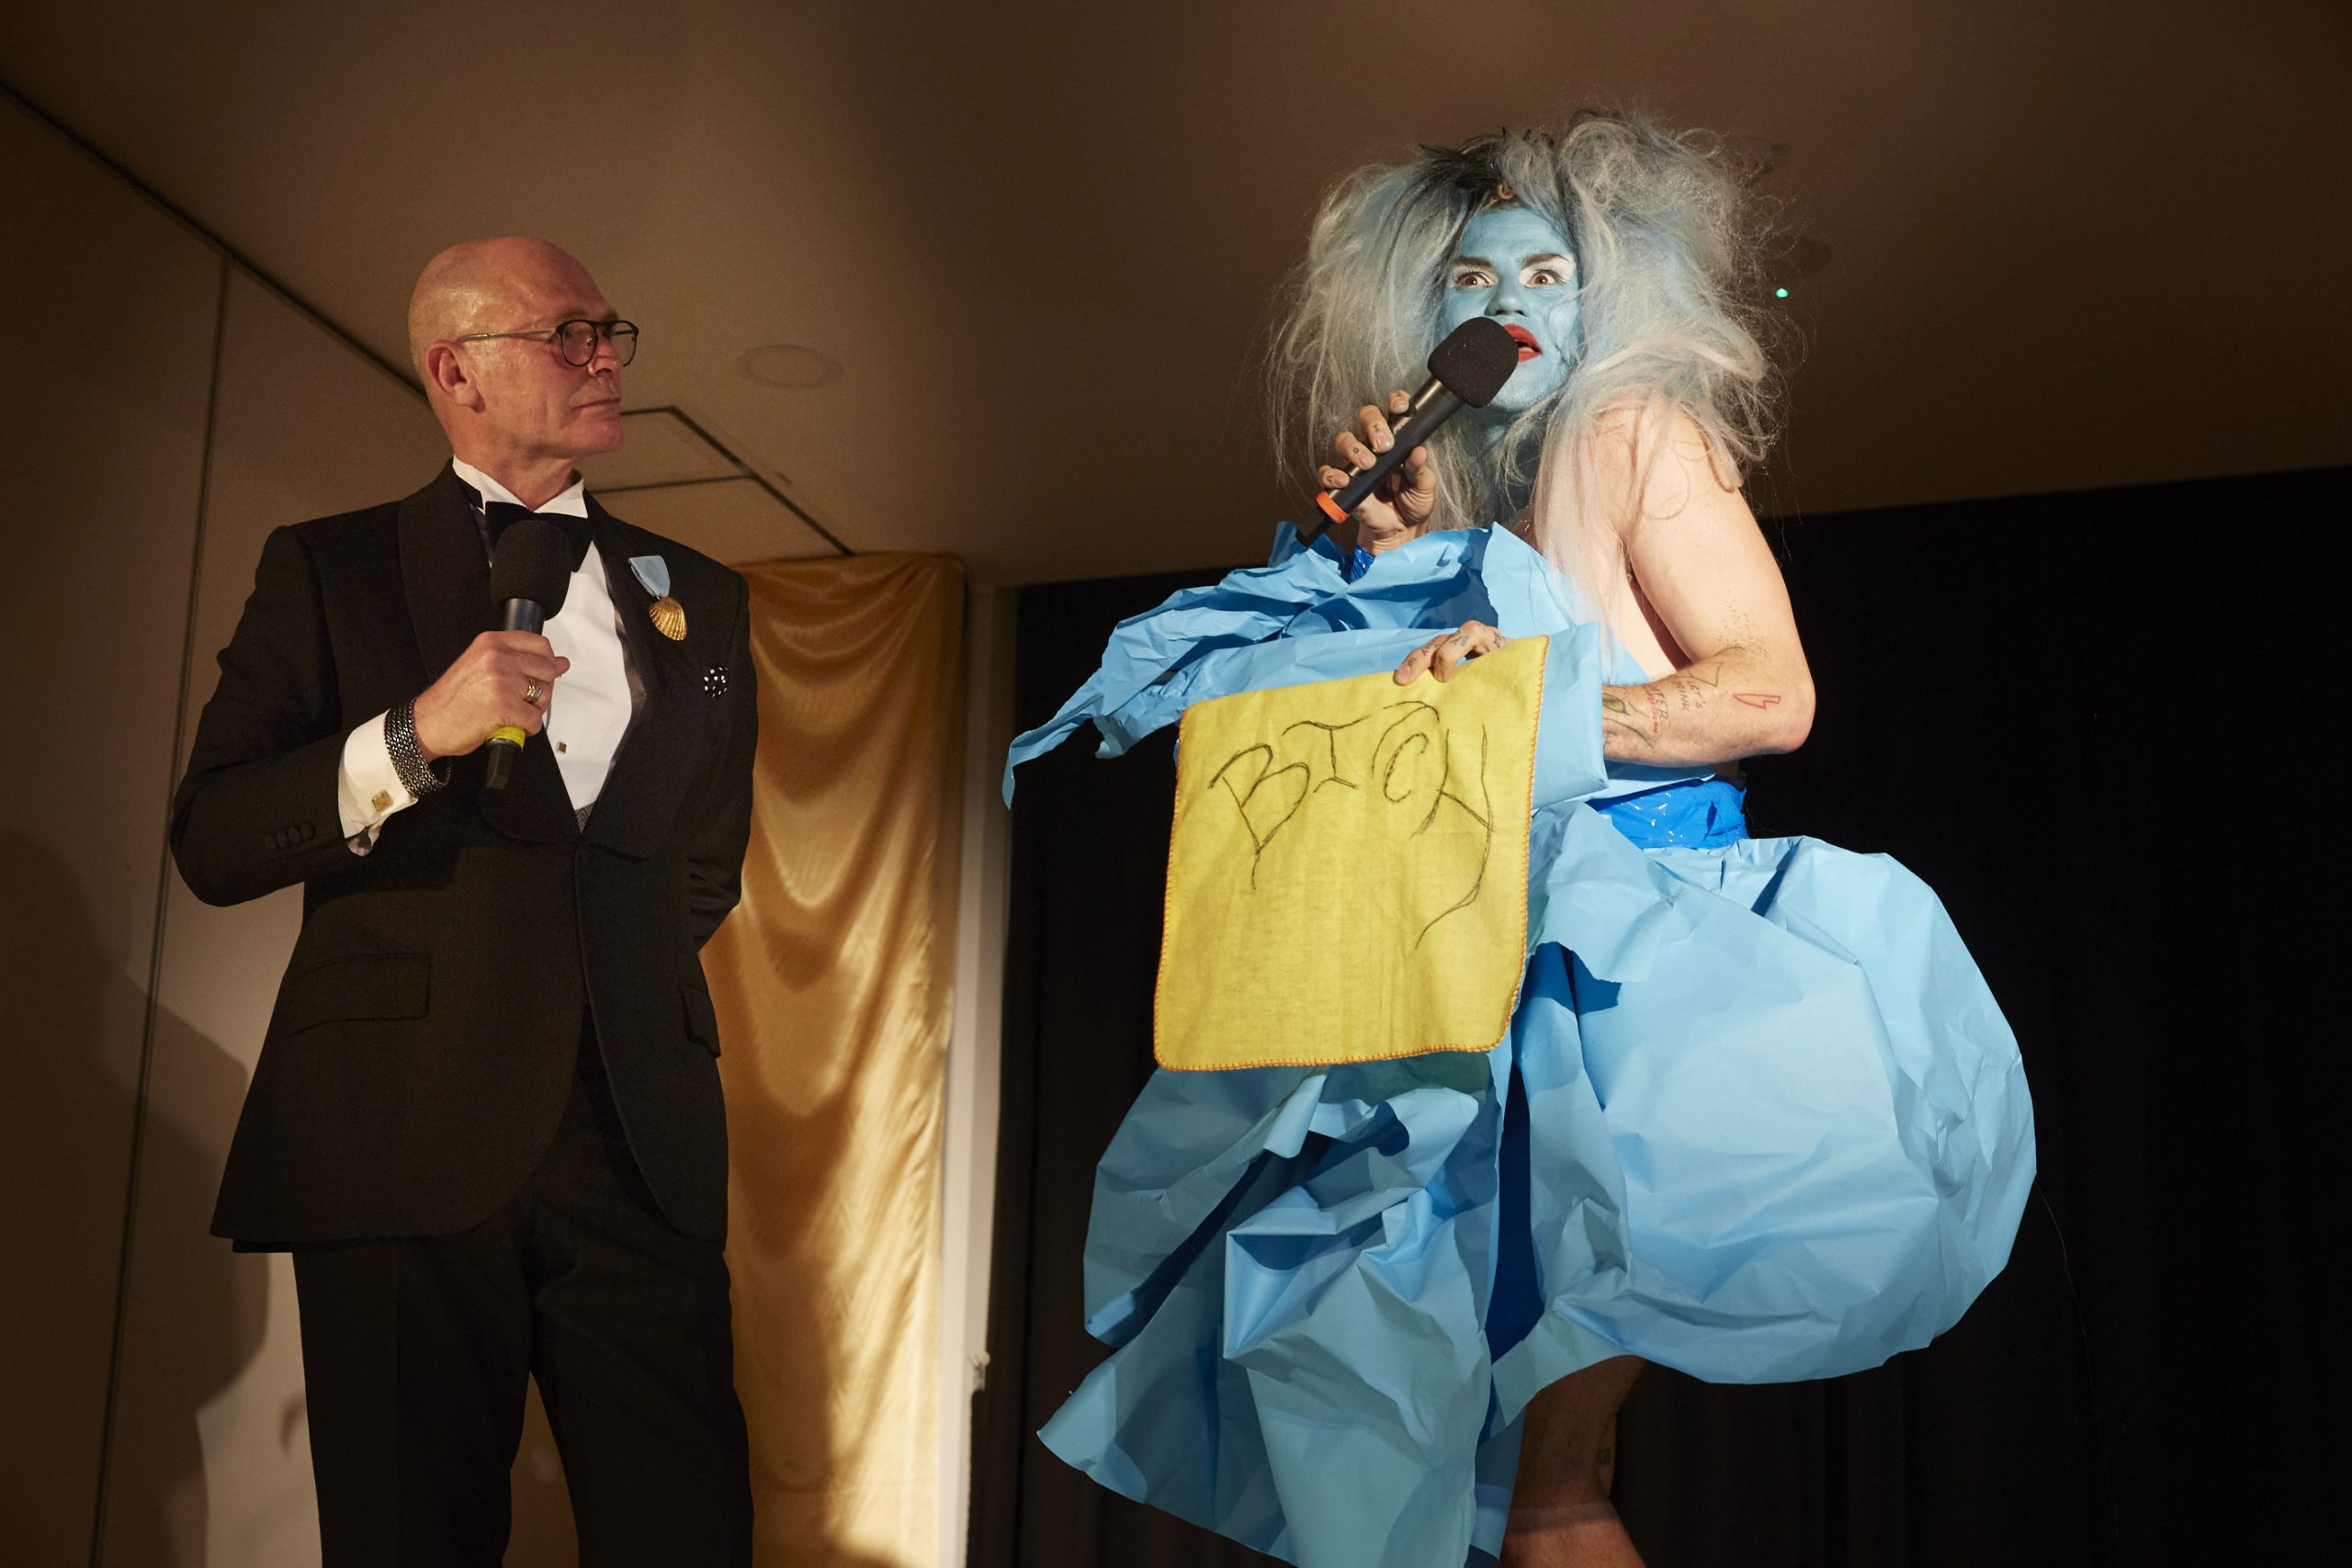 Drag performer with a blue face, wig and dress holds a yellow cloth with the word 'bitch' embroidered in it. An auctioneer in a tuxedo watches.